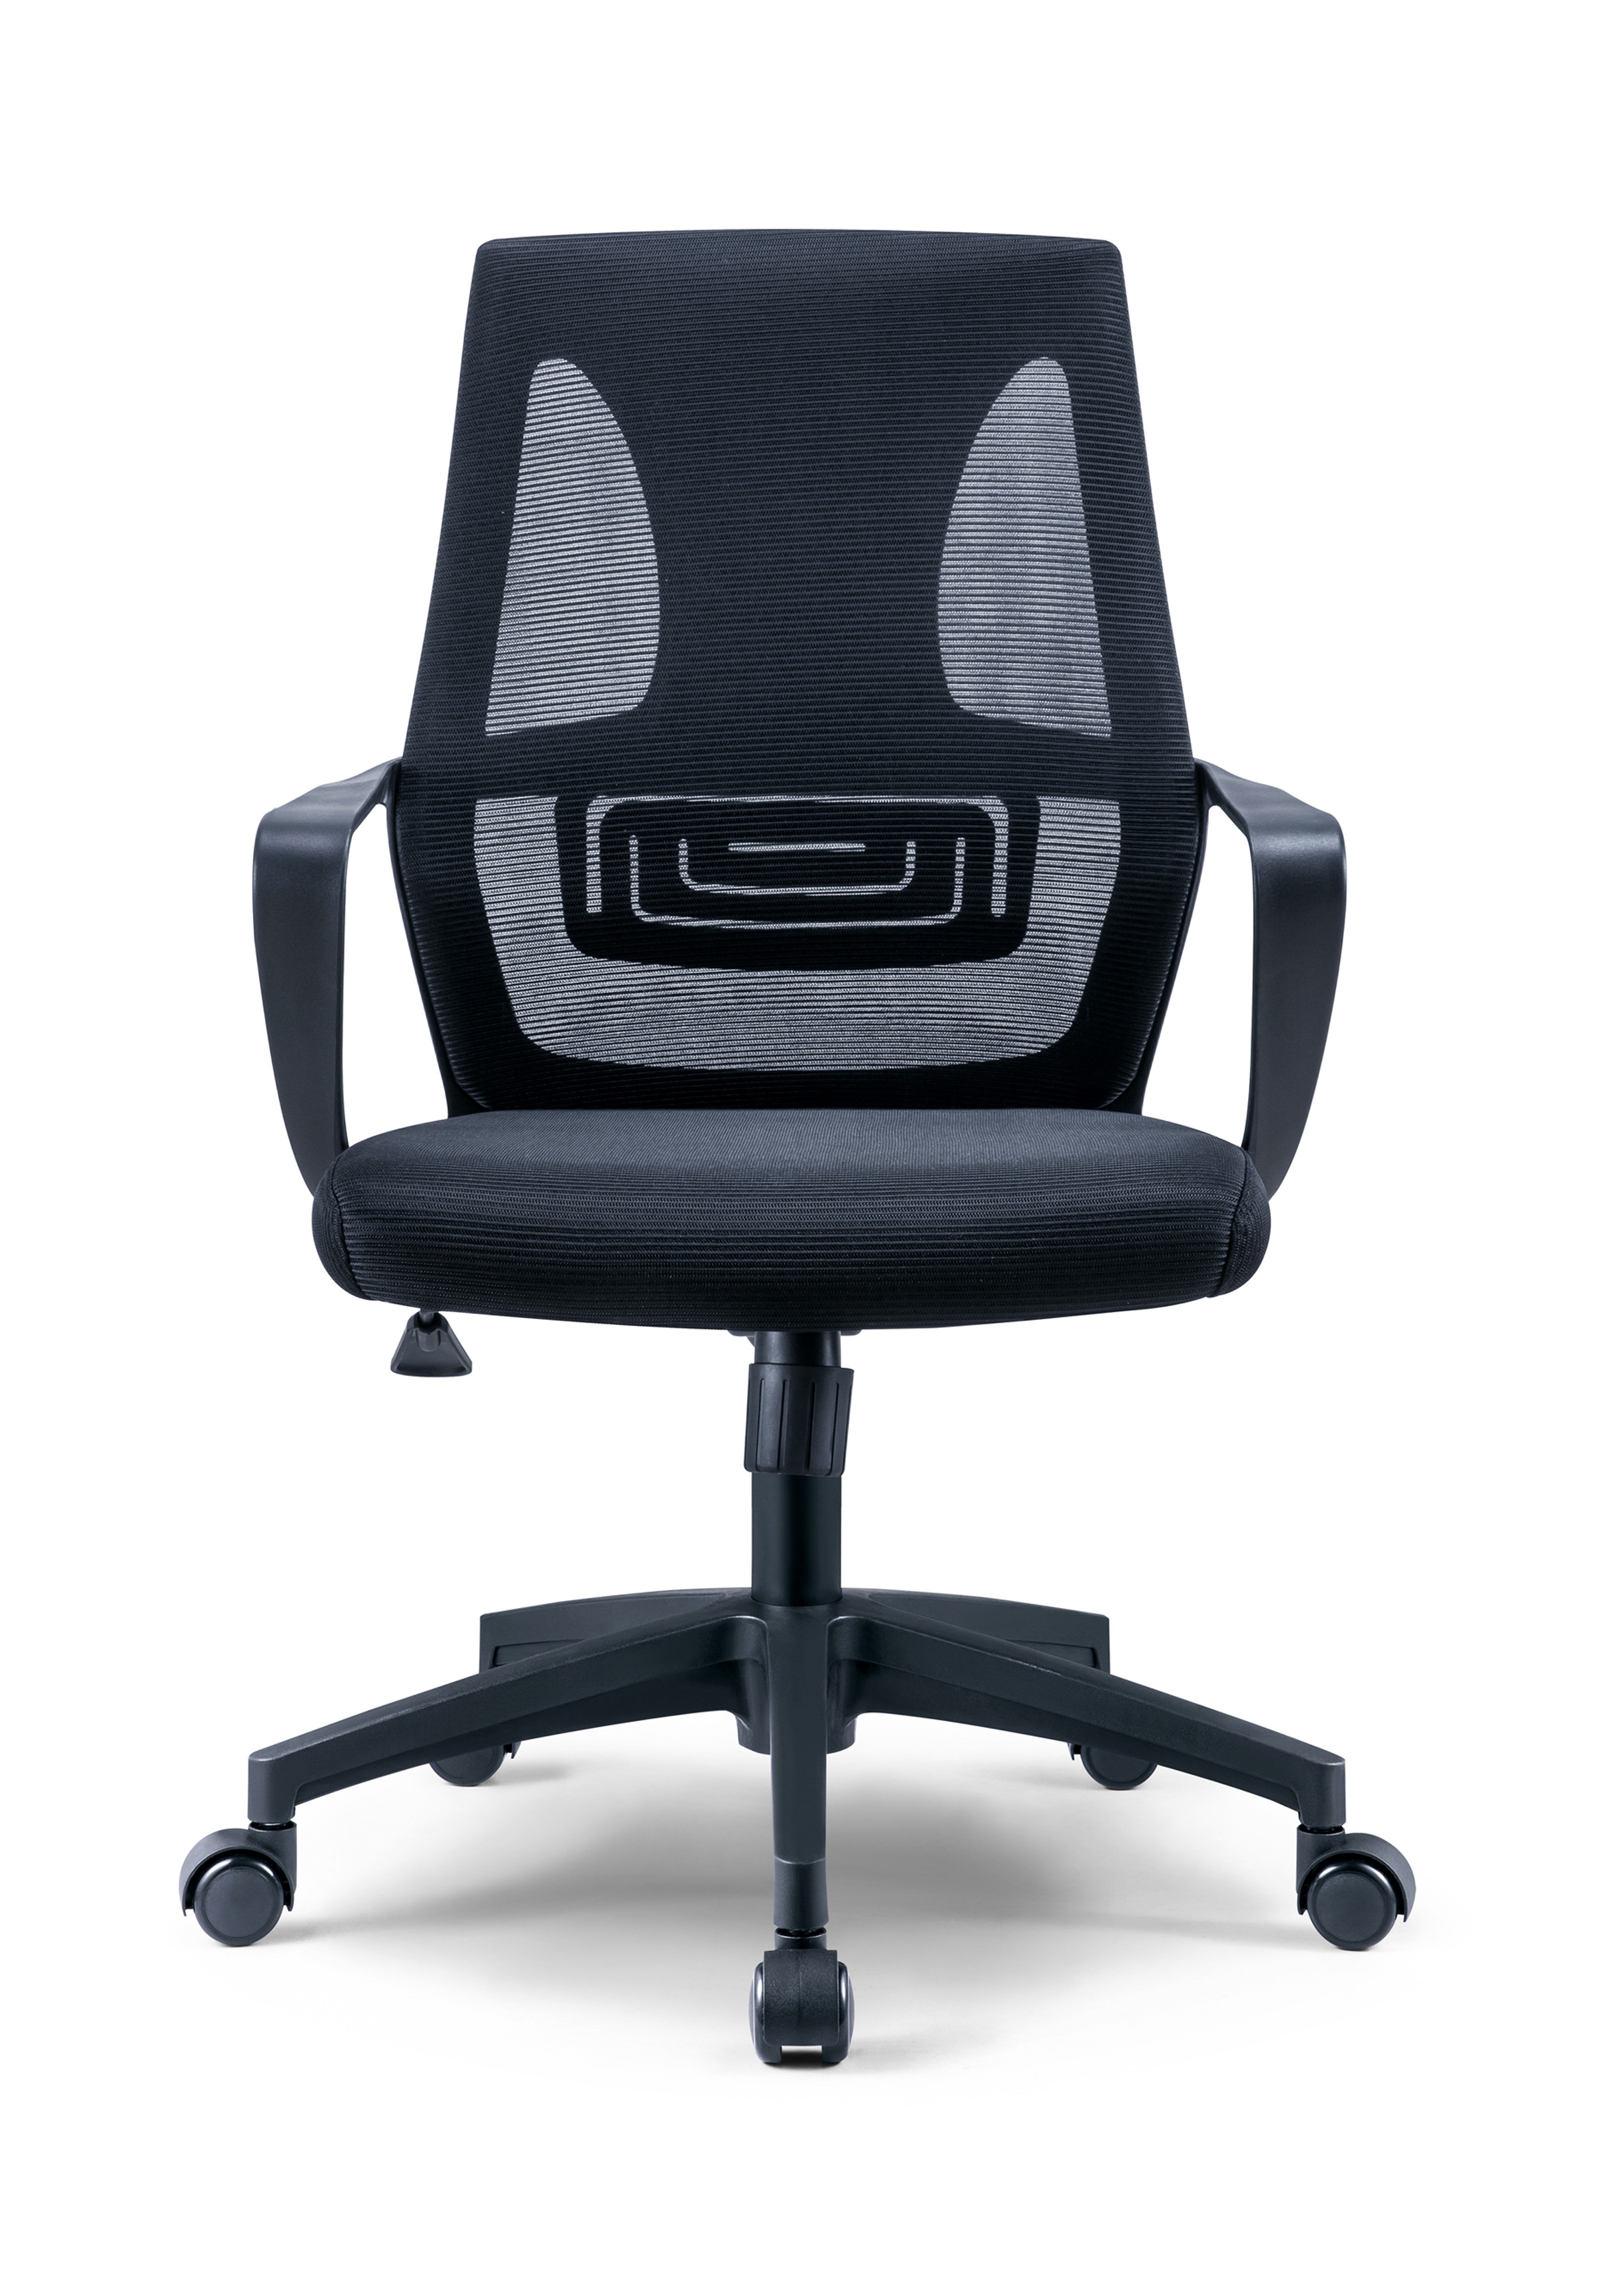 China Newcity 544B Factory Direct Mesh Chair Swivel Middle Back Executive Mesh Office Chair for Meeting Room Mesh Chair Computer Mesh Chair Supplier Foshan China manufacturer